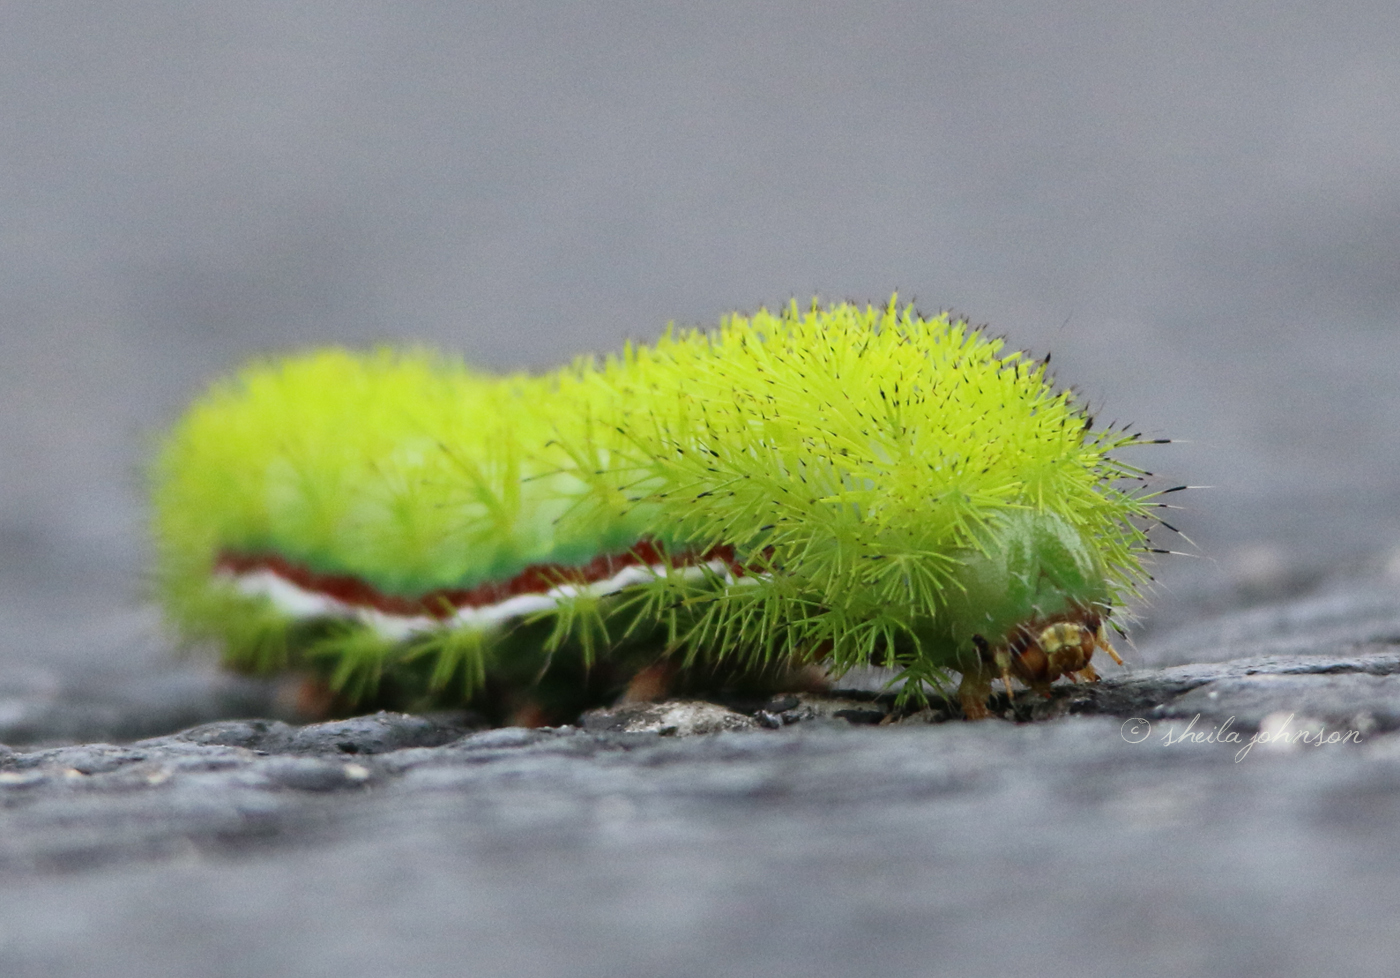 Yes, This Funky Lime Green Caterpillar, Looking Like It Just Stepped Out Of A 70S Disco, Is Fun To Look At -- Photograph Even -- But This Io Moth Caterpillar Is Poisonous. Those Cute, Fuzzy Looking Spines Are Connected To Their Poison Glands. Keep An Eye Out For Them In South Florida.